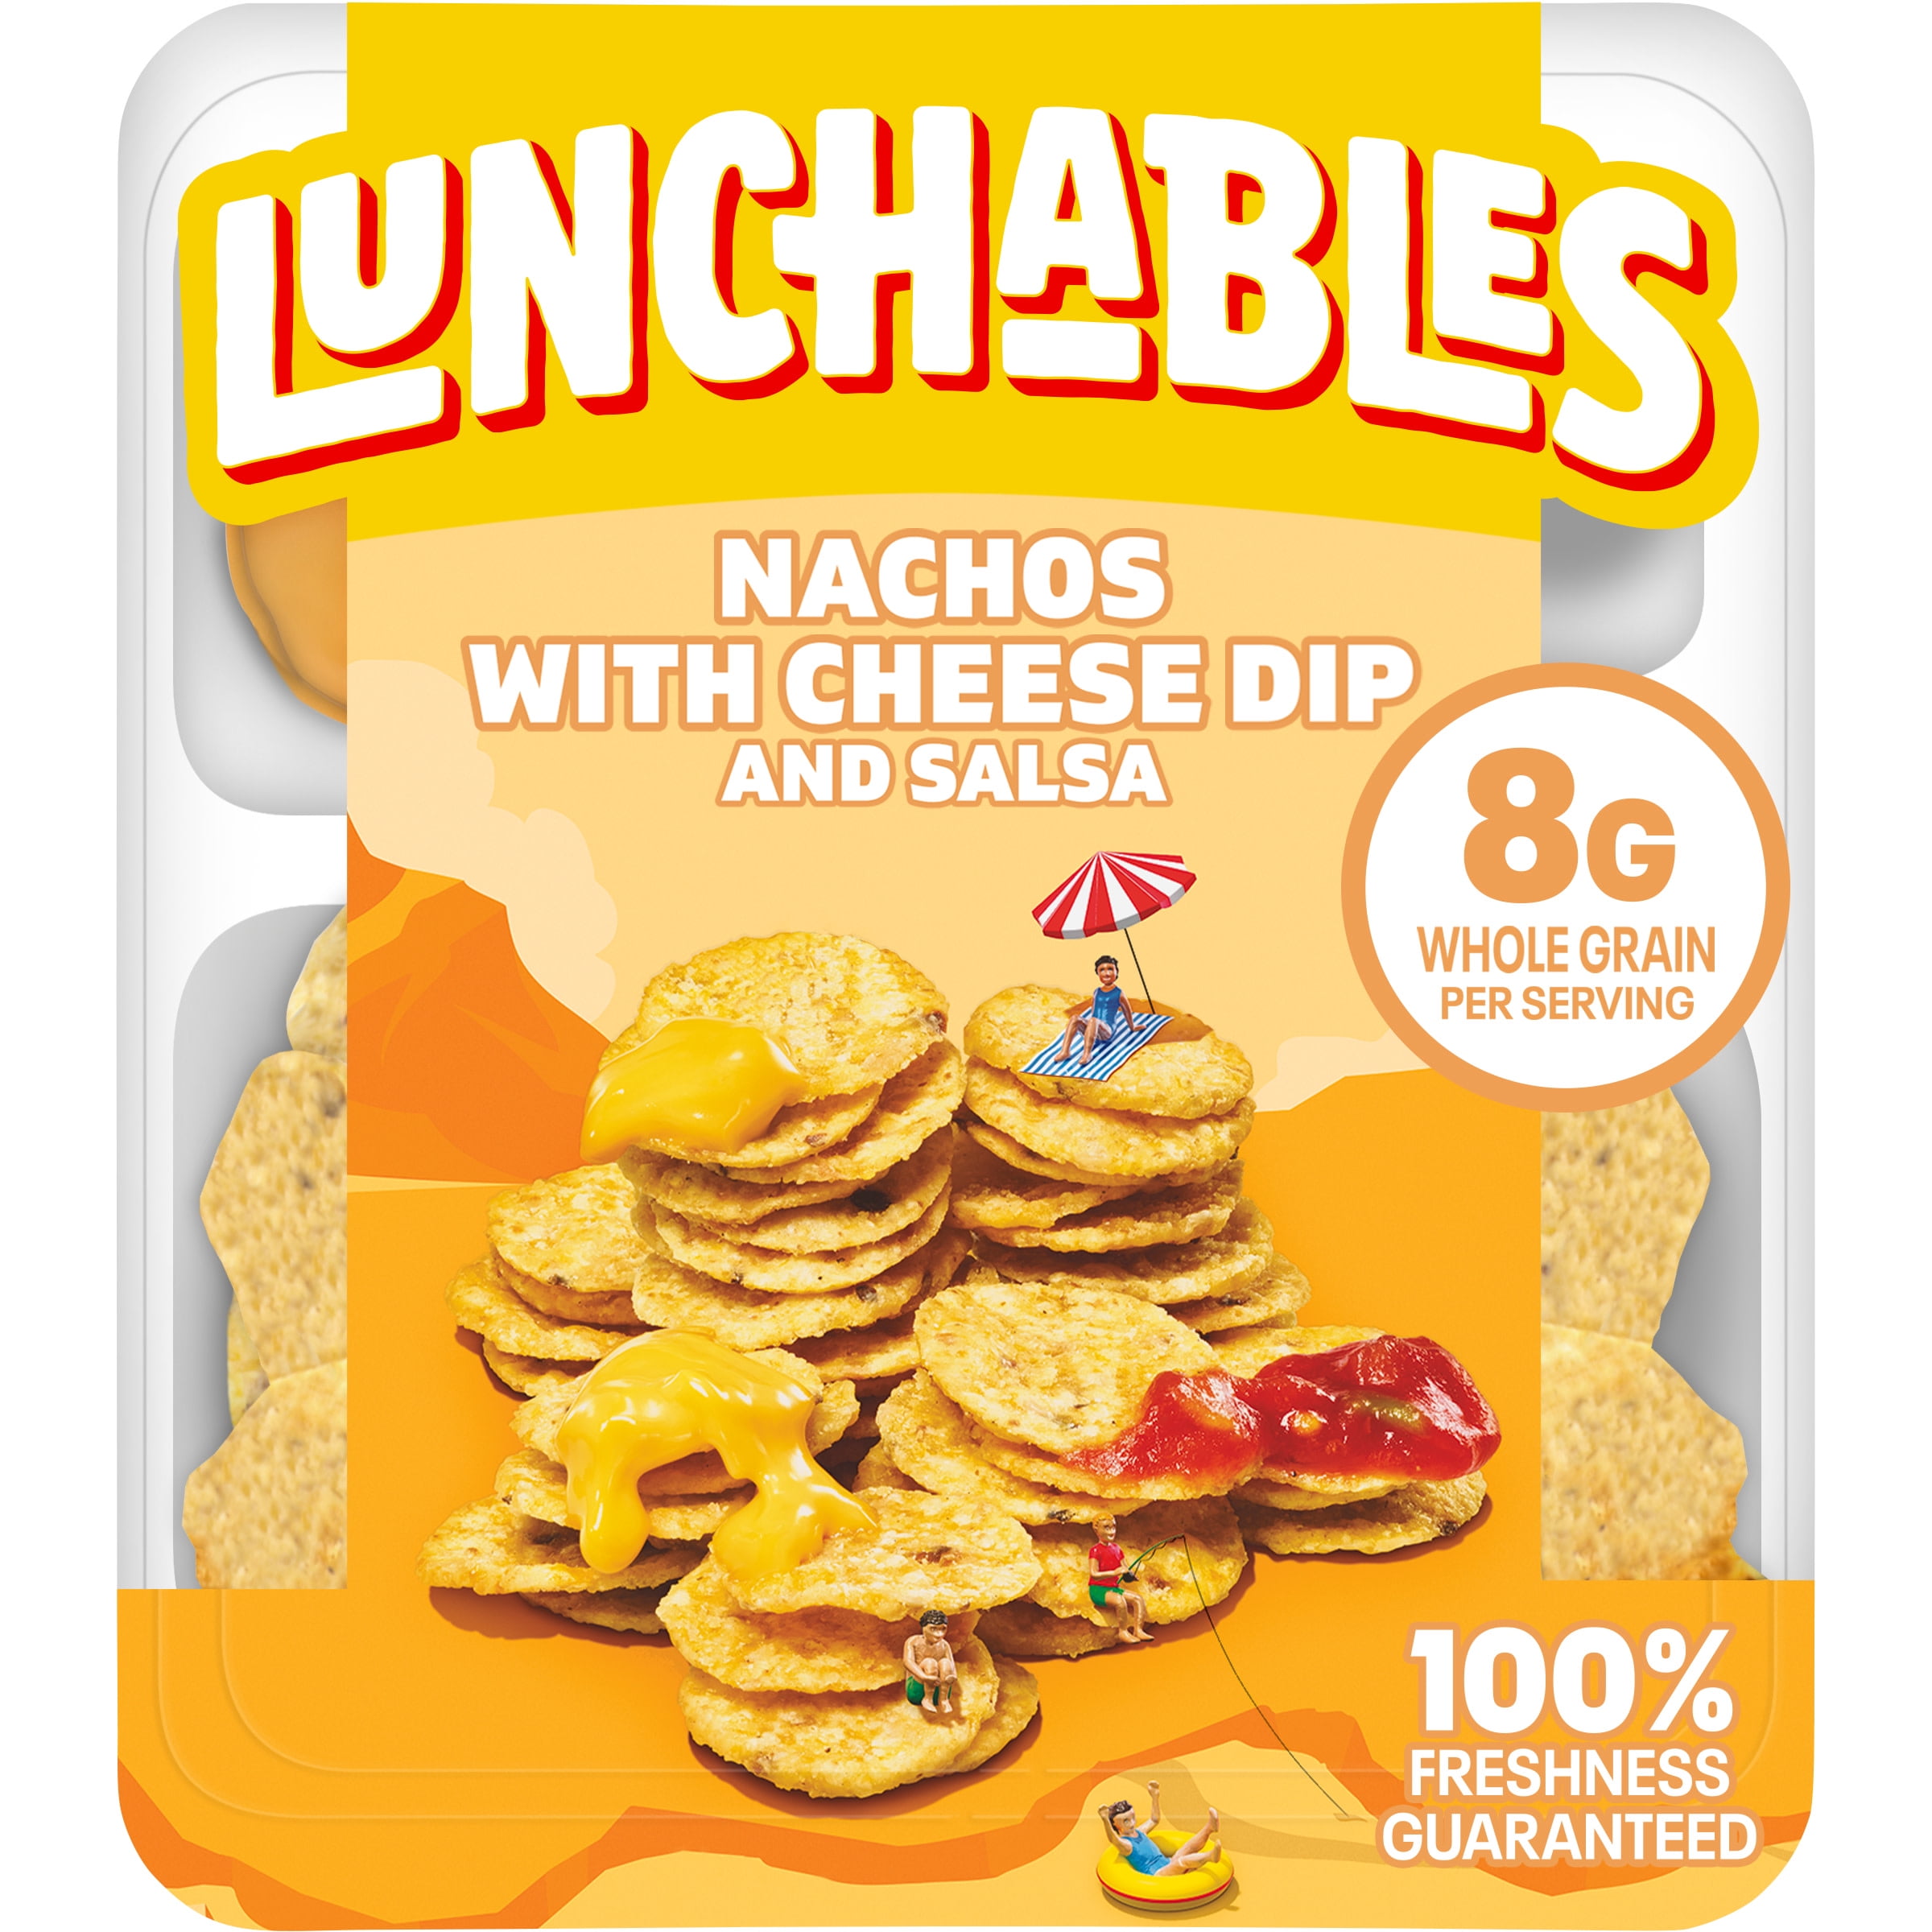 Lunchables Nachos Cheese Dip & Salsa Kids Lunch Snack, 4.4 oz Tray